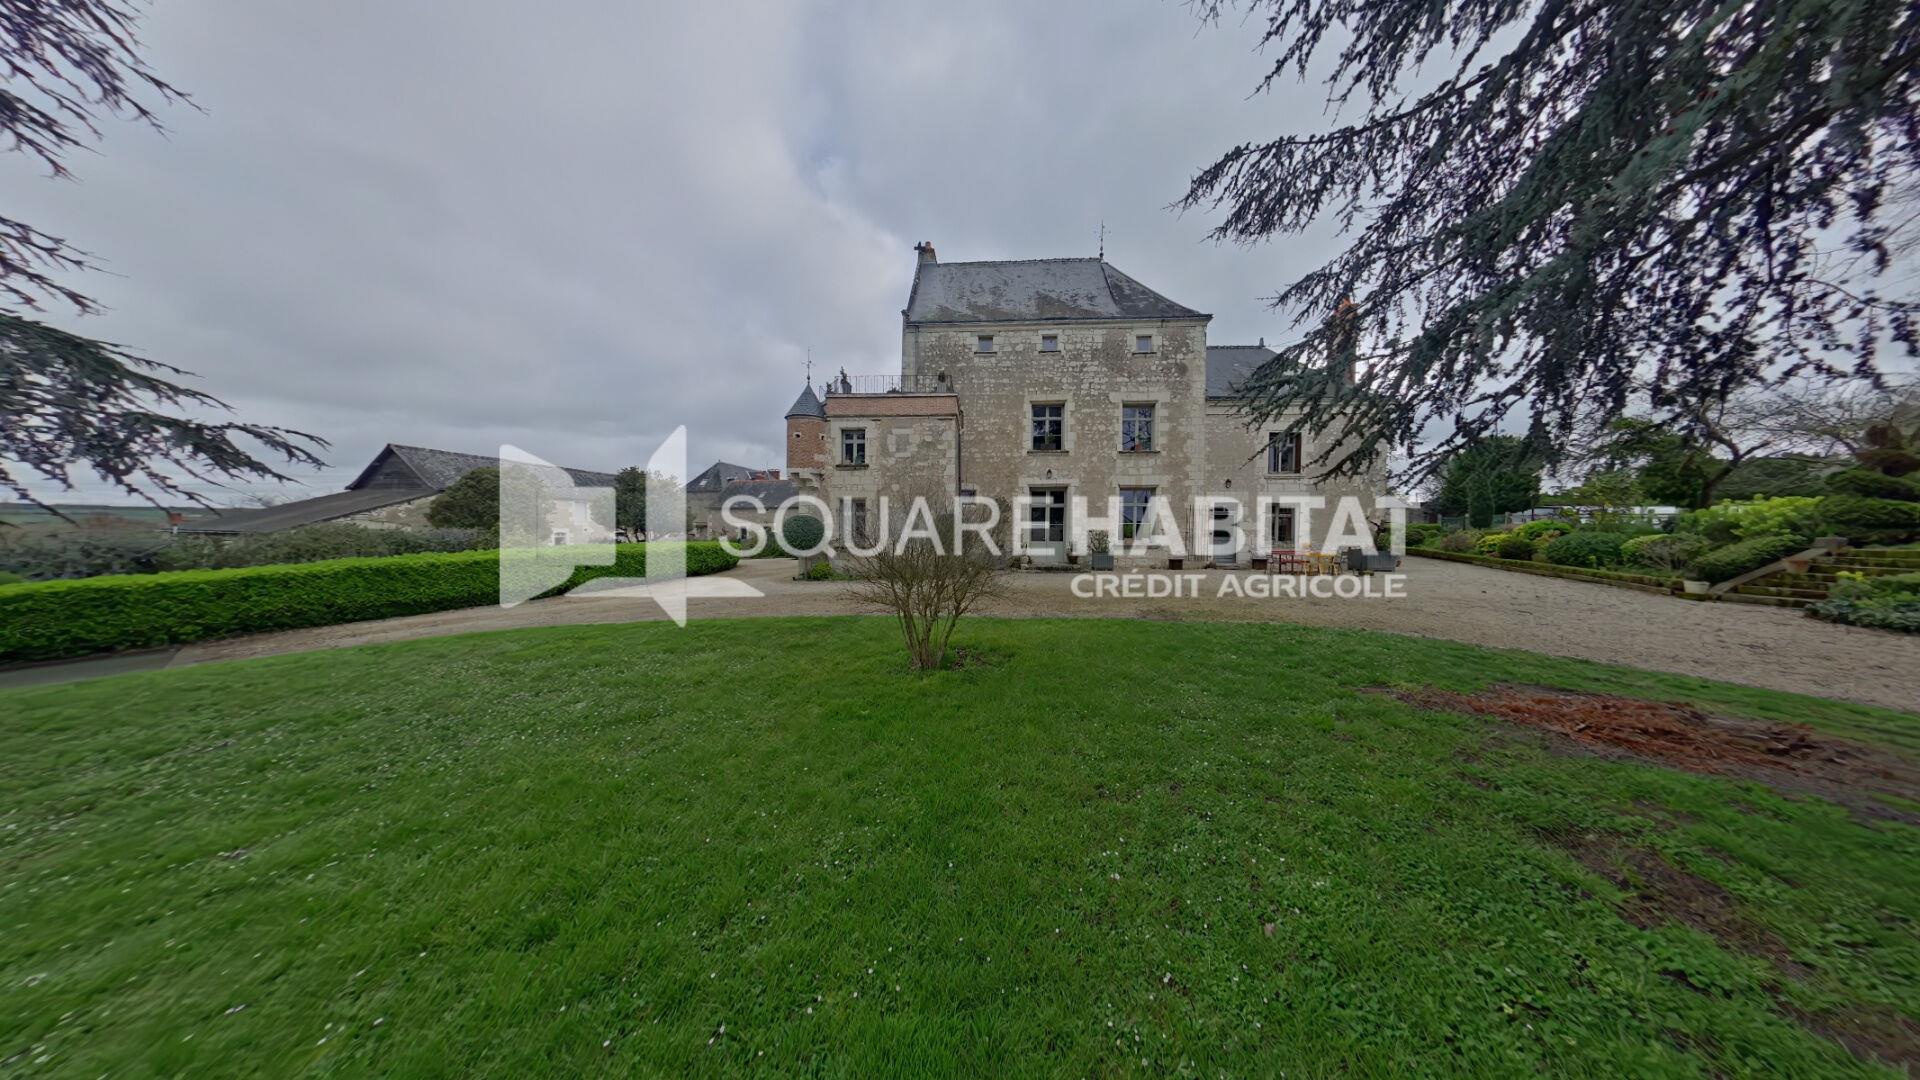 Chateau near Ile Bouchard 400 m2 - 5 bedrooms - Gîtes - Park - Indoor swimming pool